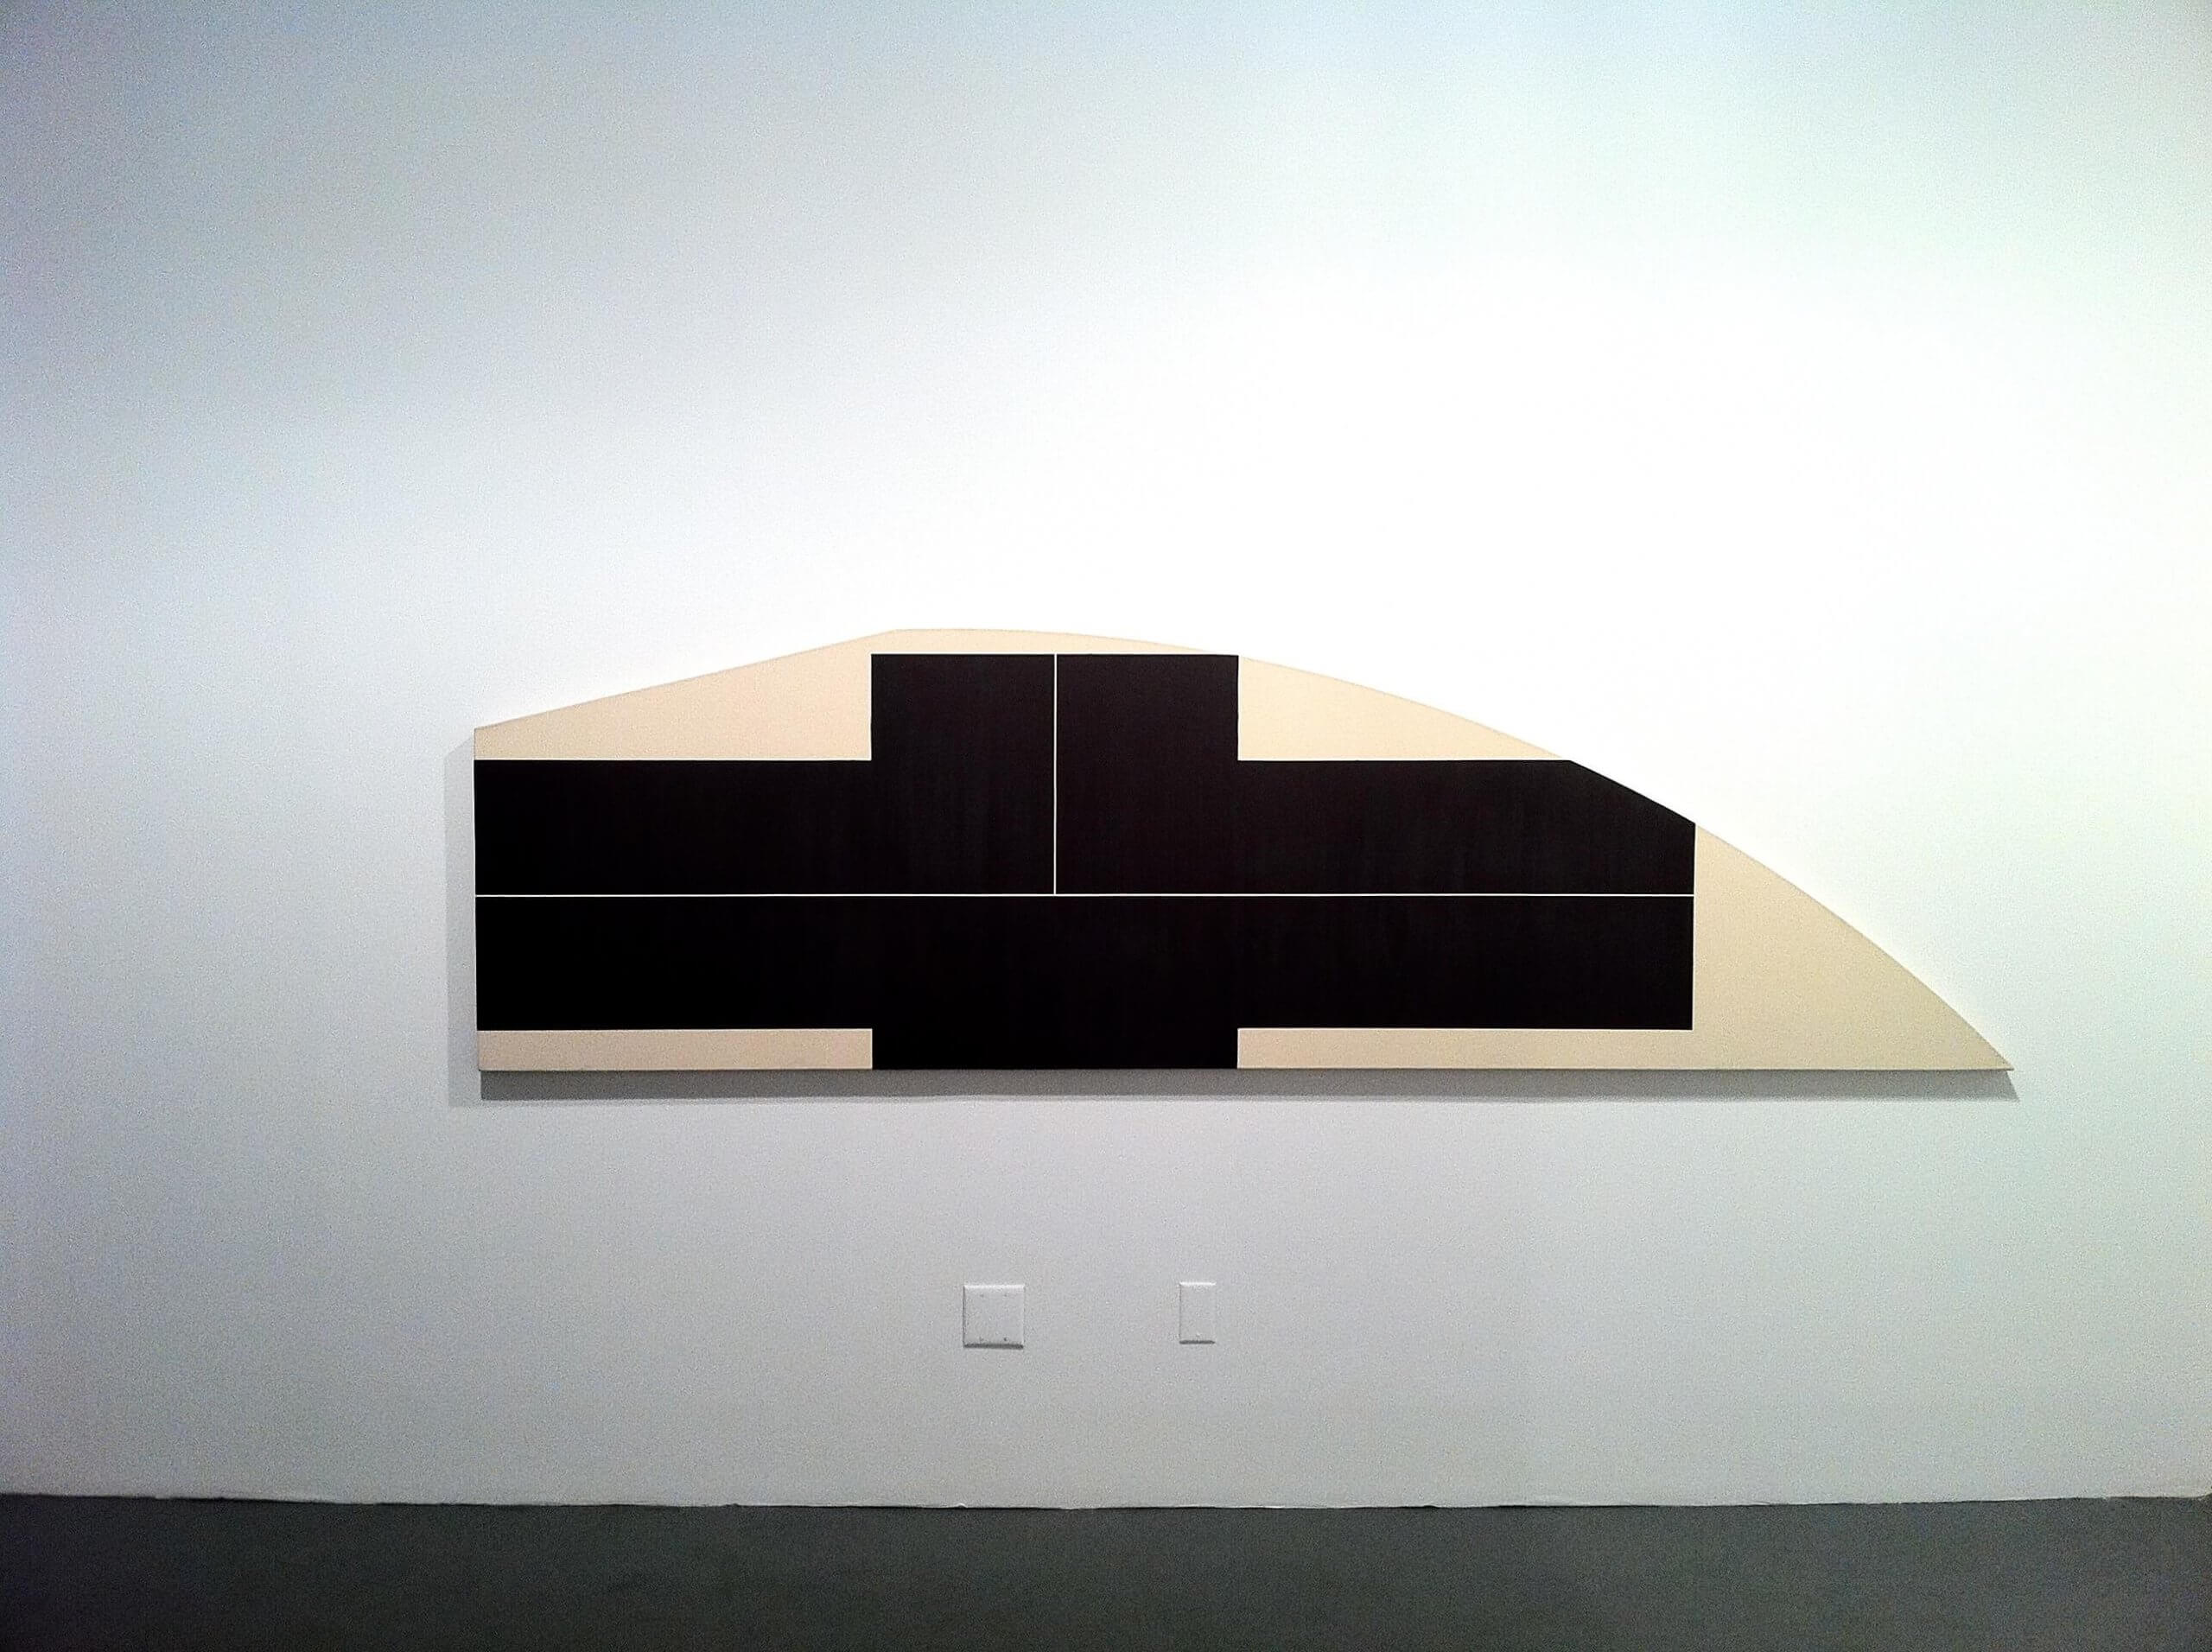 Ted Stamm, ZYR-4, 1979, oil on canvas (courtesy Minus Space & Estate of Ted Stamm)